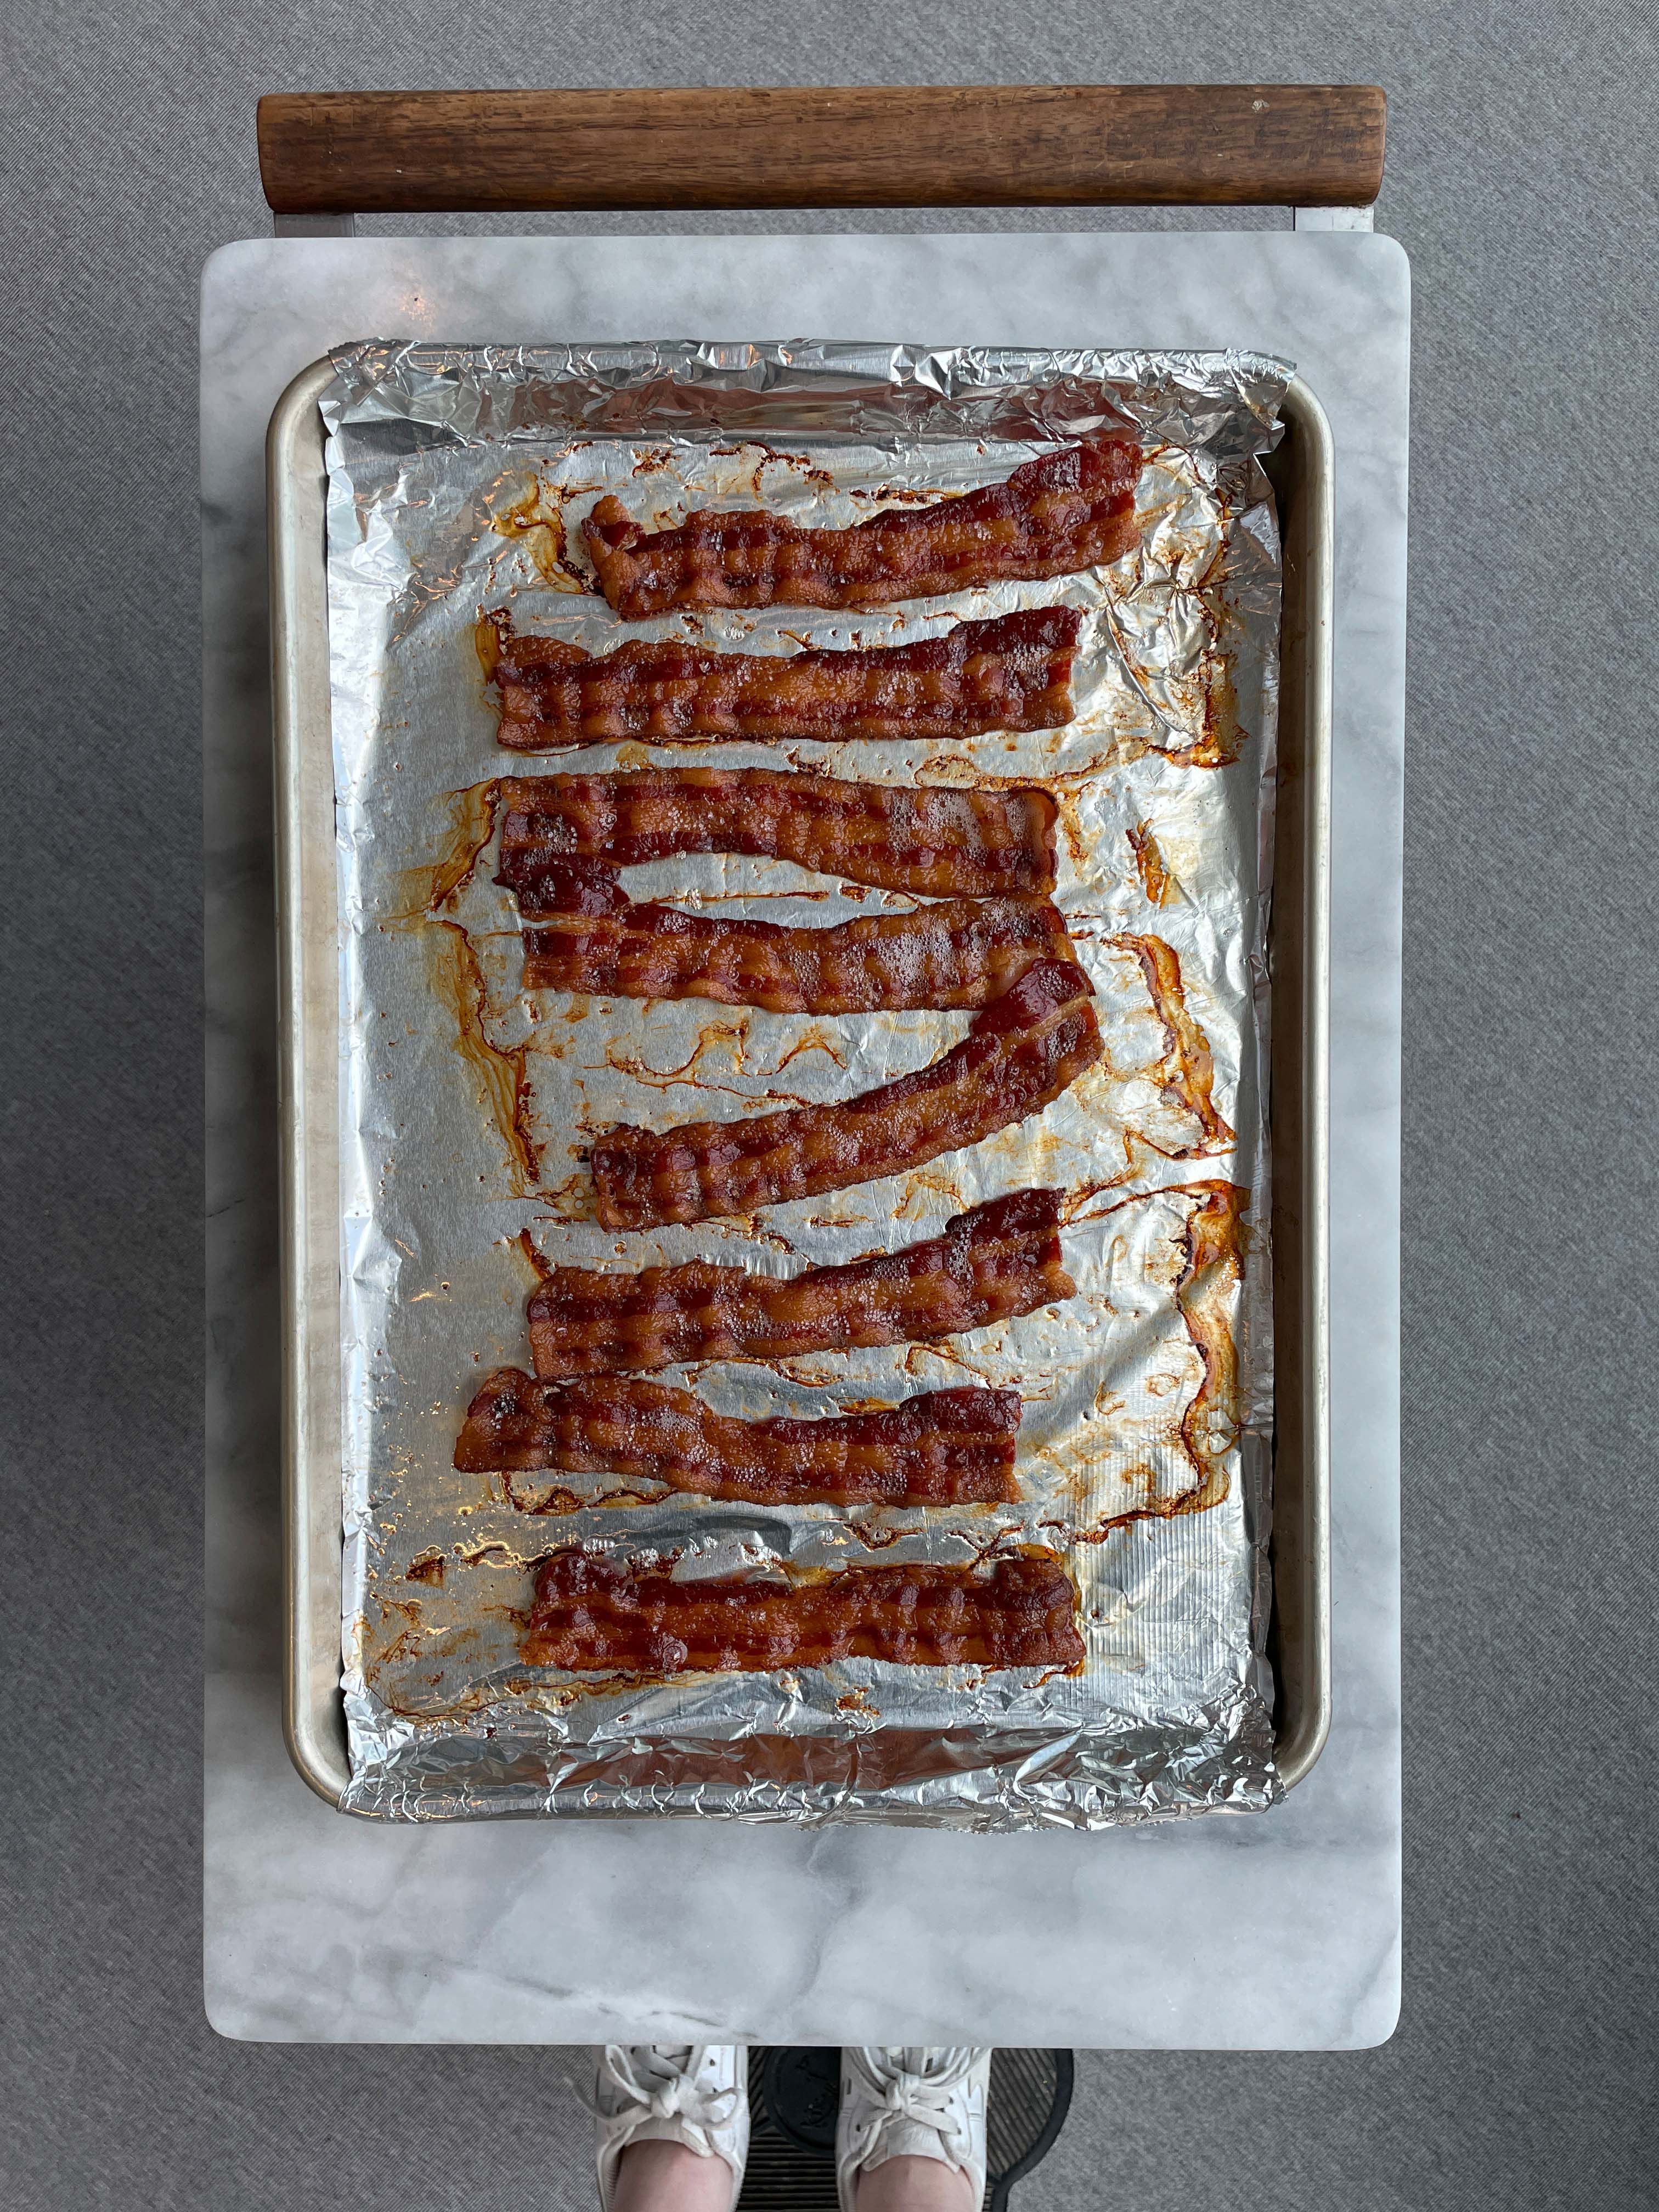 How To Cook Bacon In The Oven (Extra Crispy) - Spend With Pennies